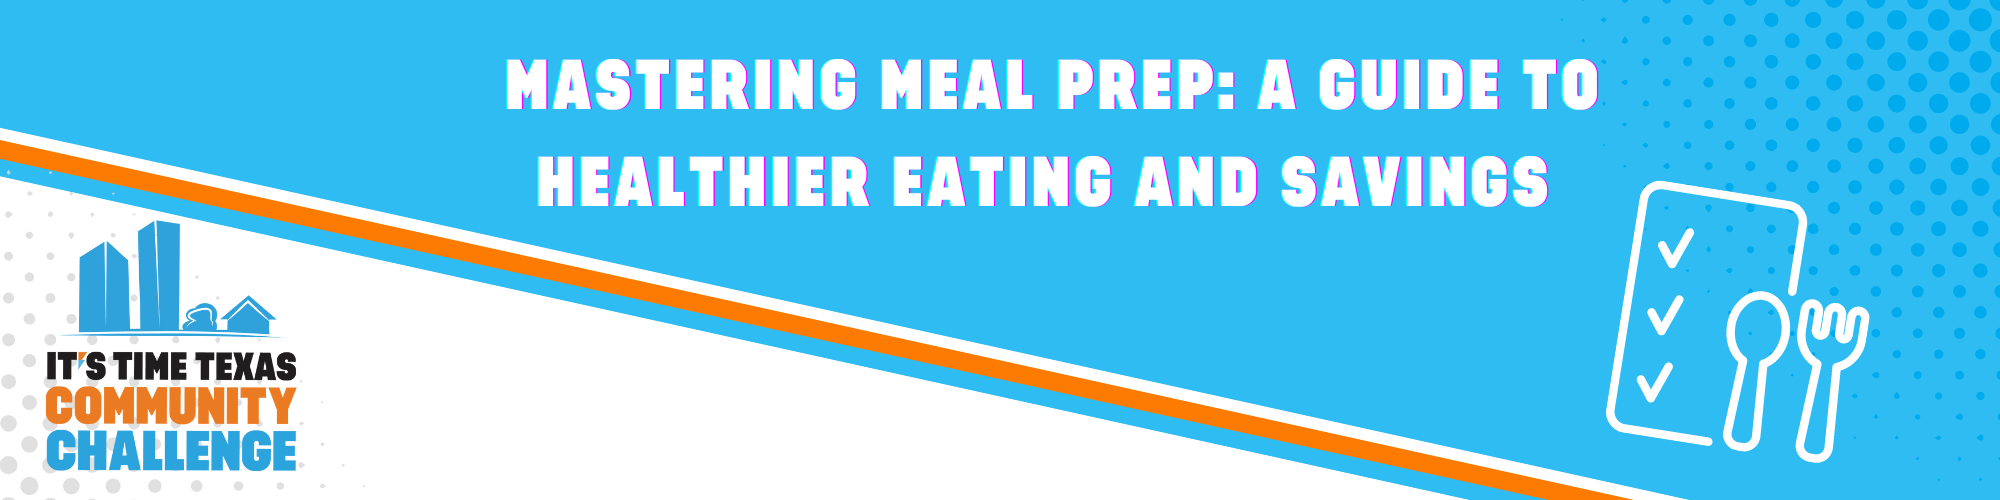 learning how to meal prep header image